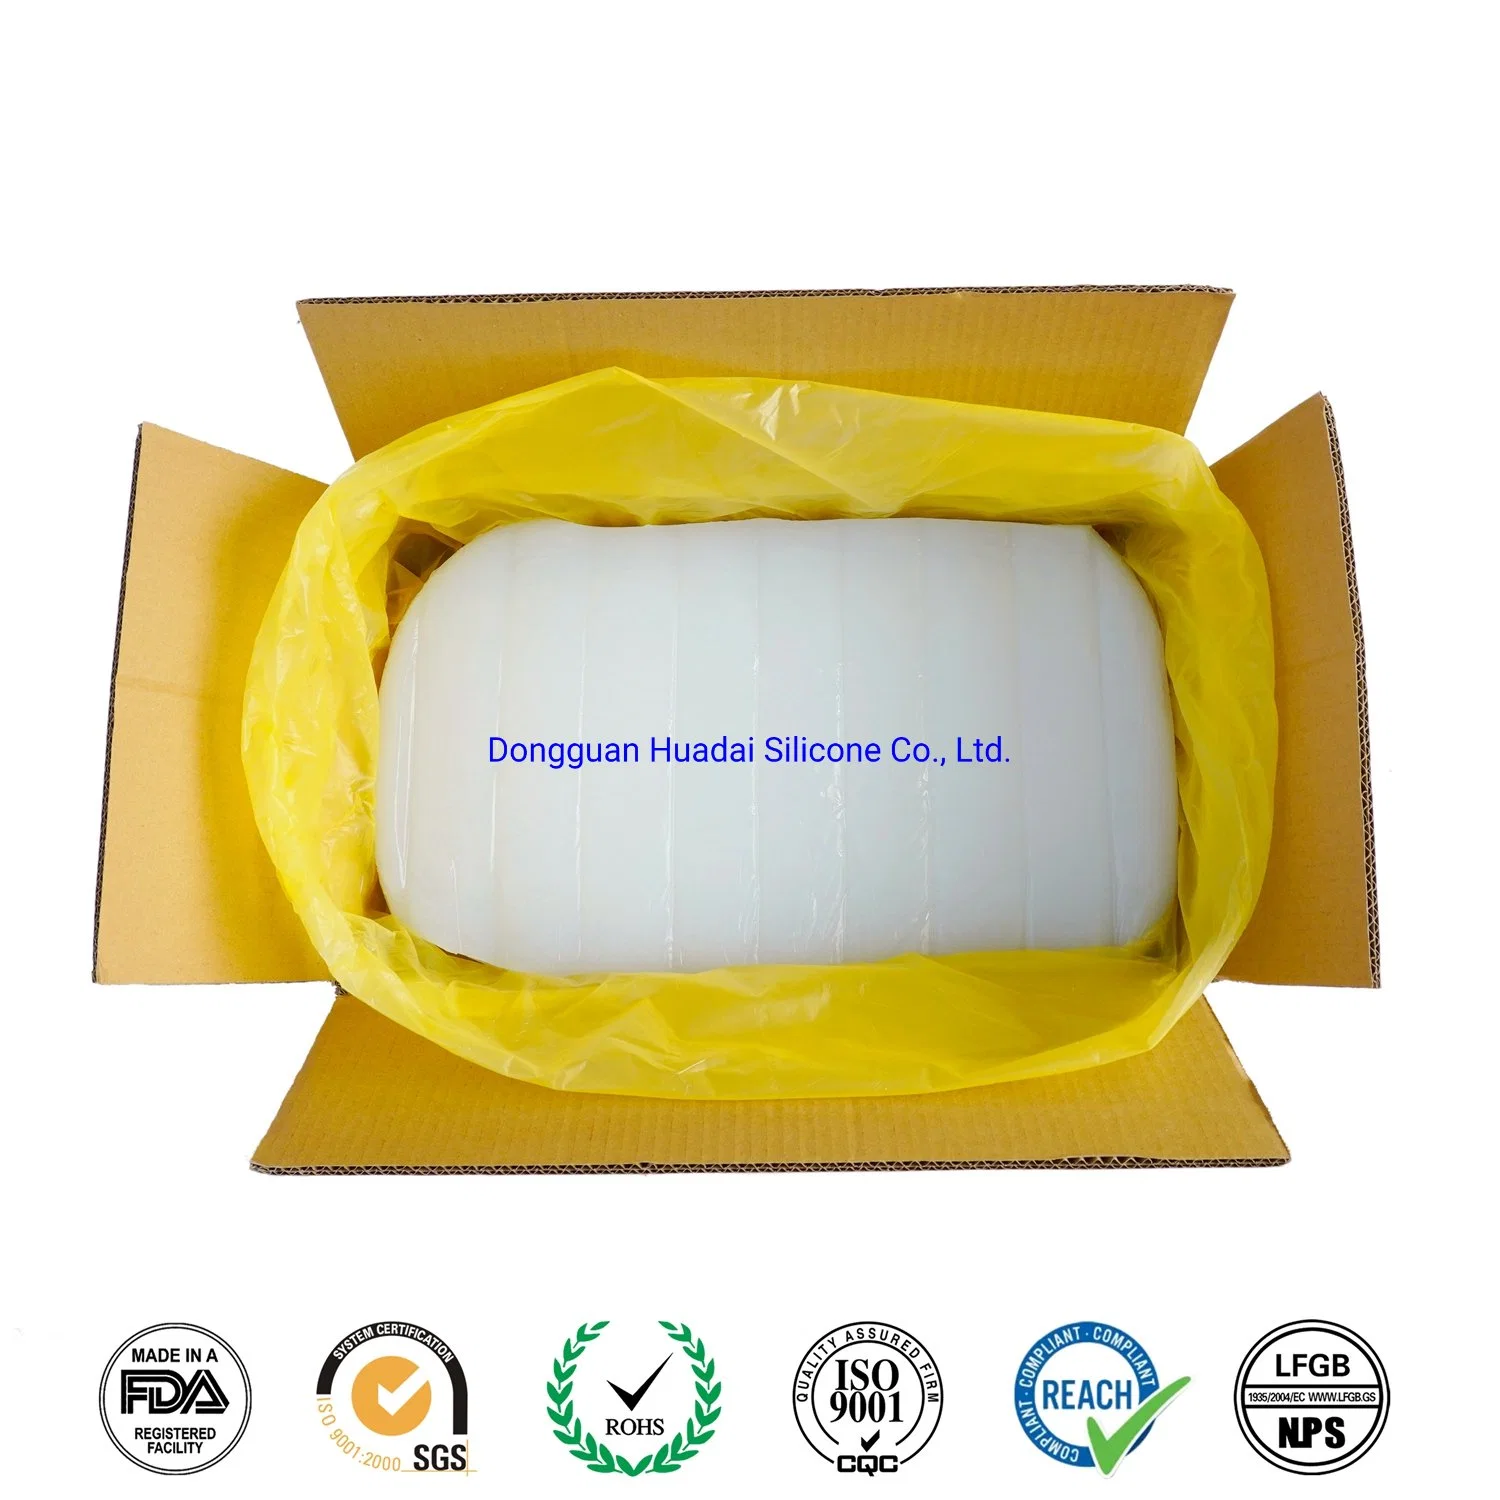 HD-6152h Heat-Resistant Silicone Rubber Good Heat Resistance and Mechanical Strength